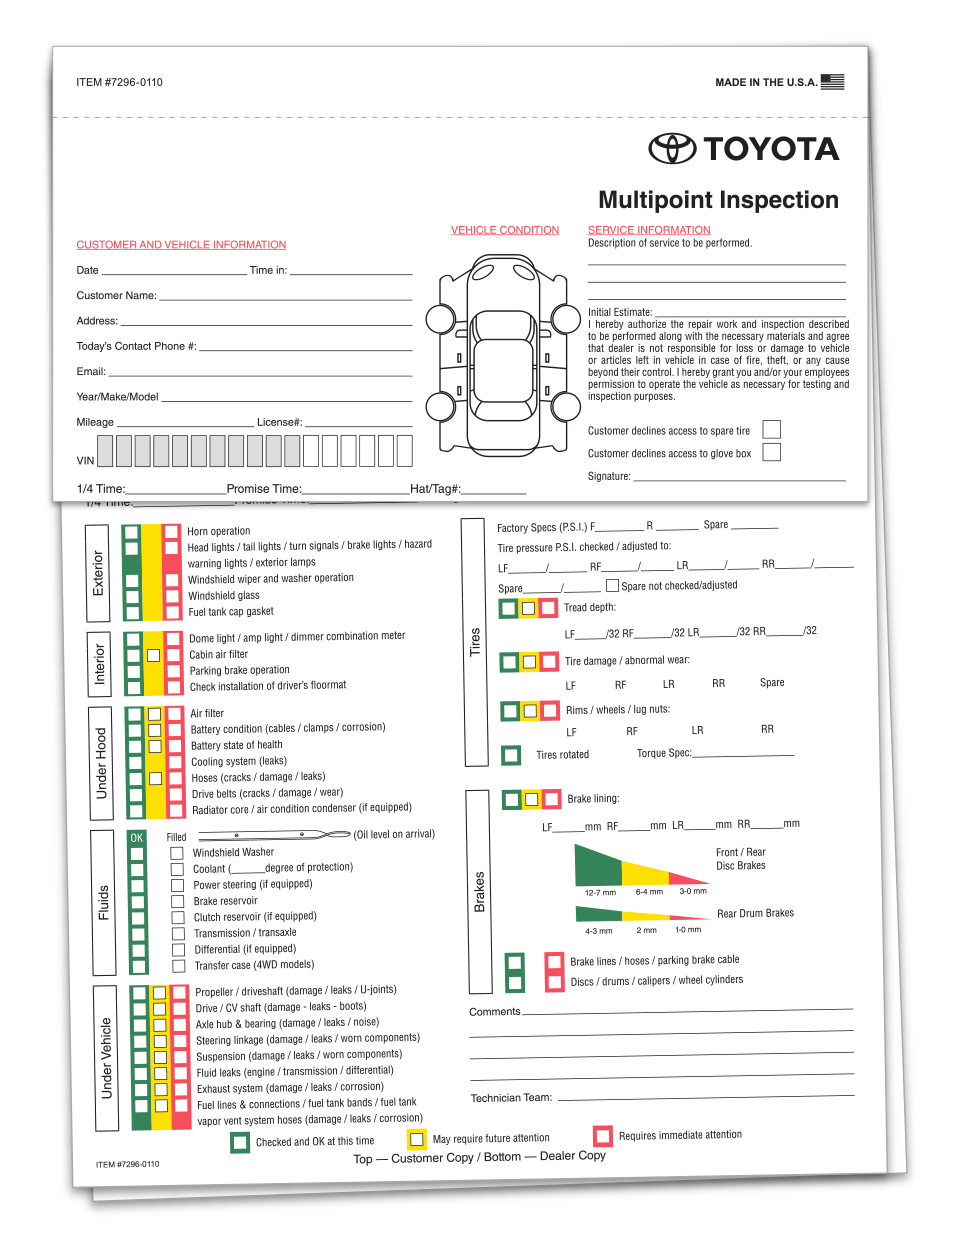 toyota-multi-point-inspection-form-pkg-of-250-forms-7296-0110